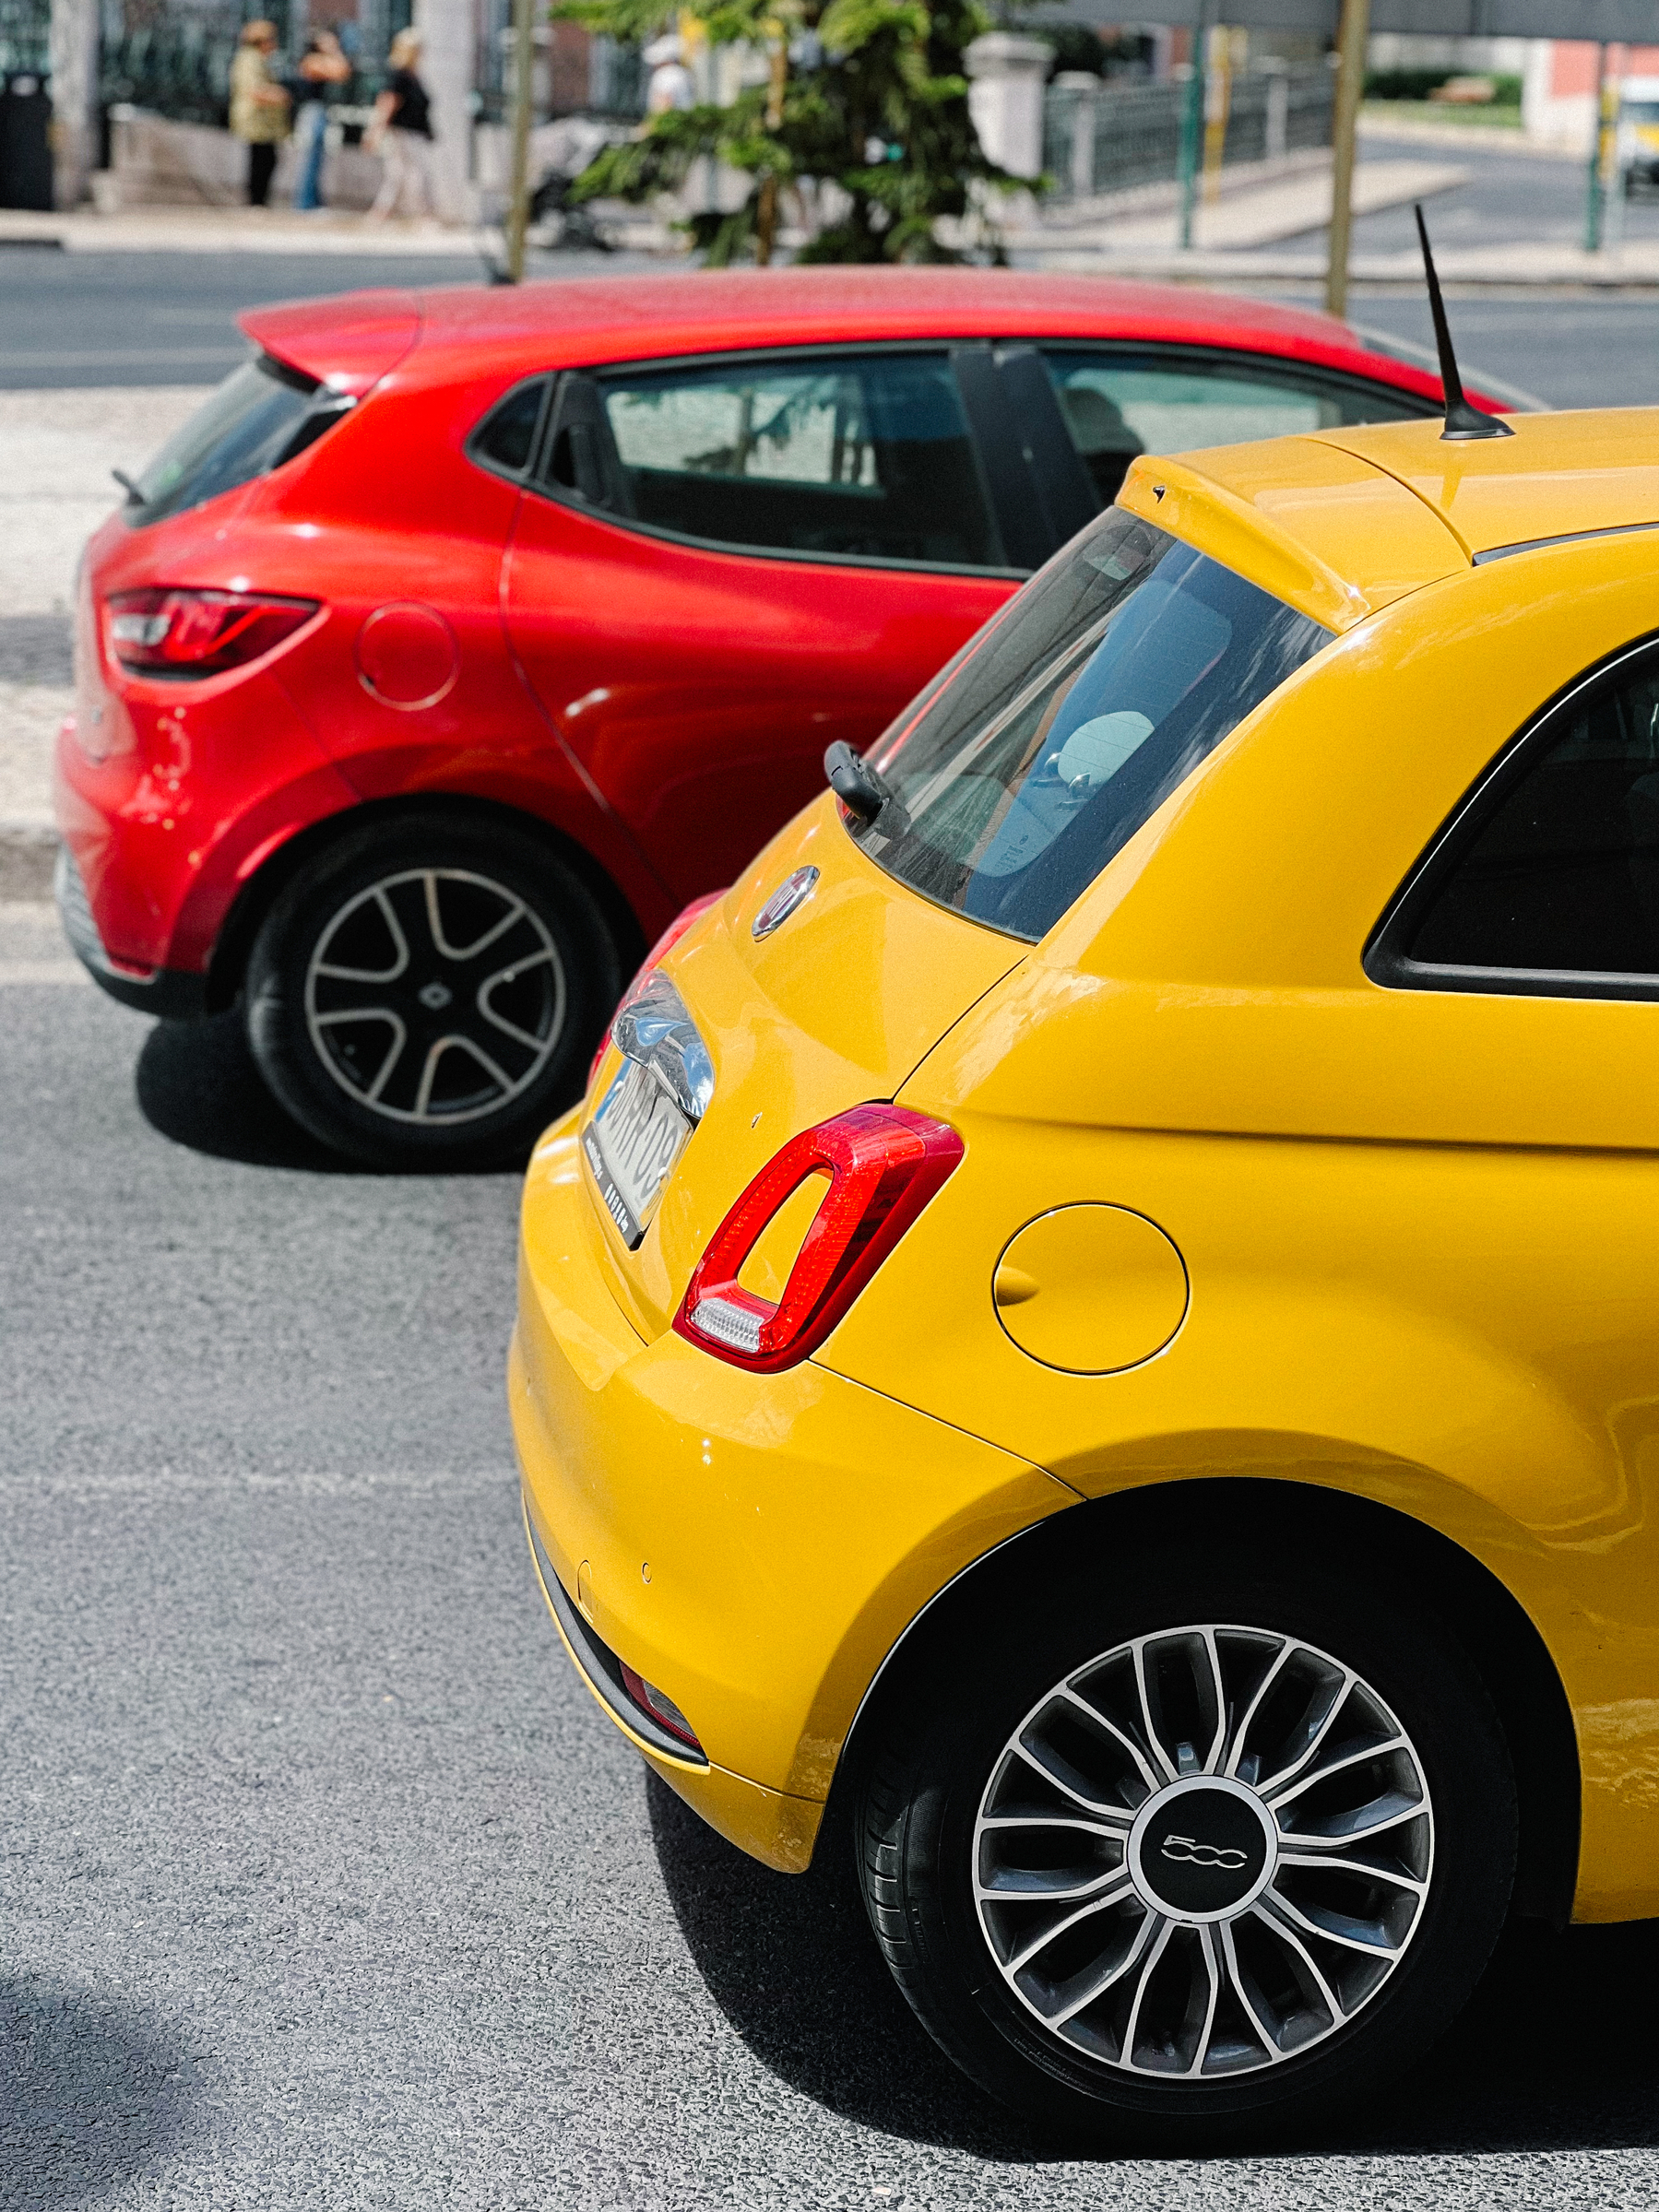 Two cars, one is yellow, the other red.